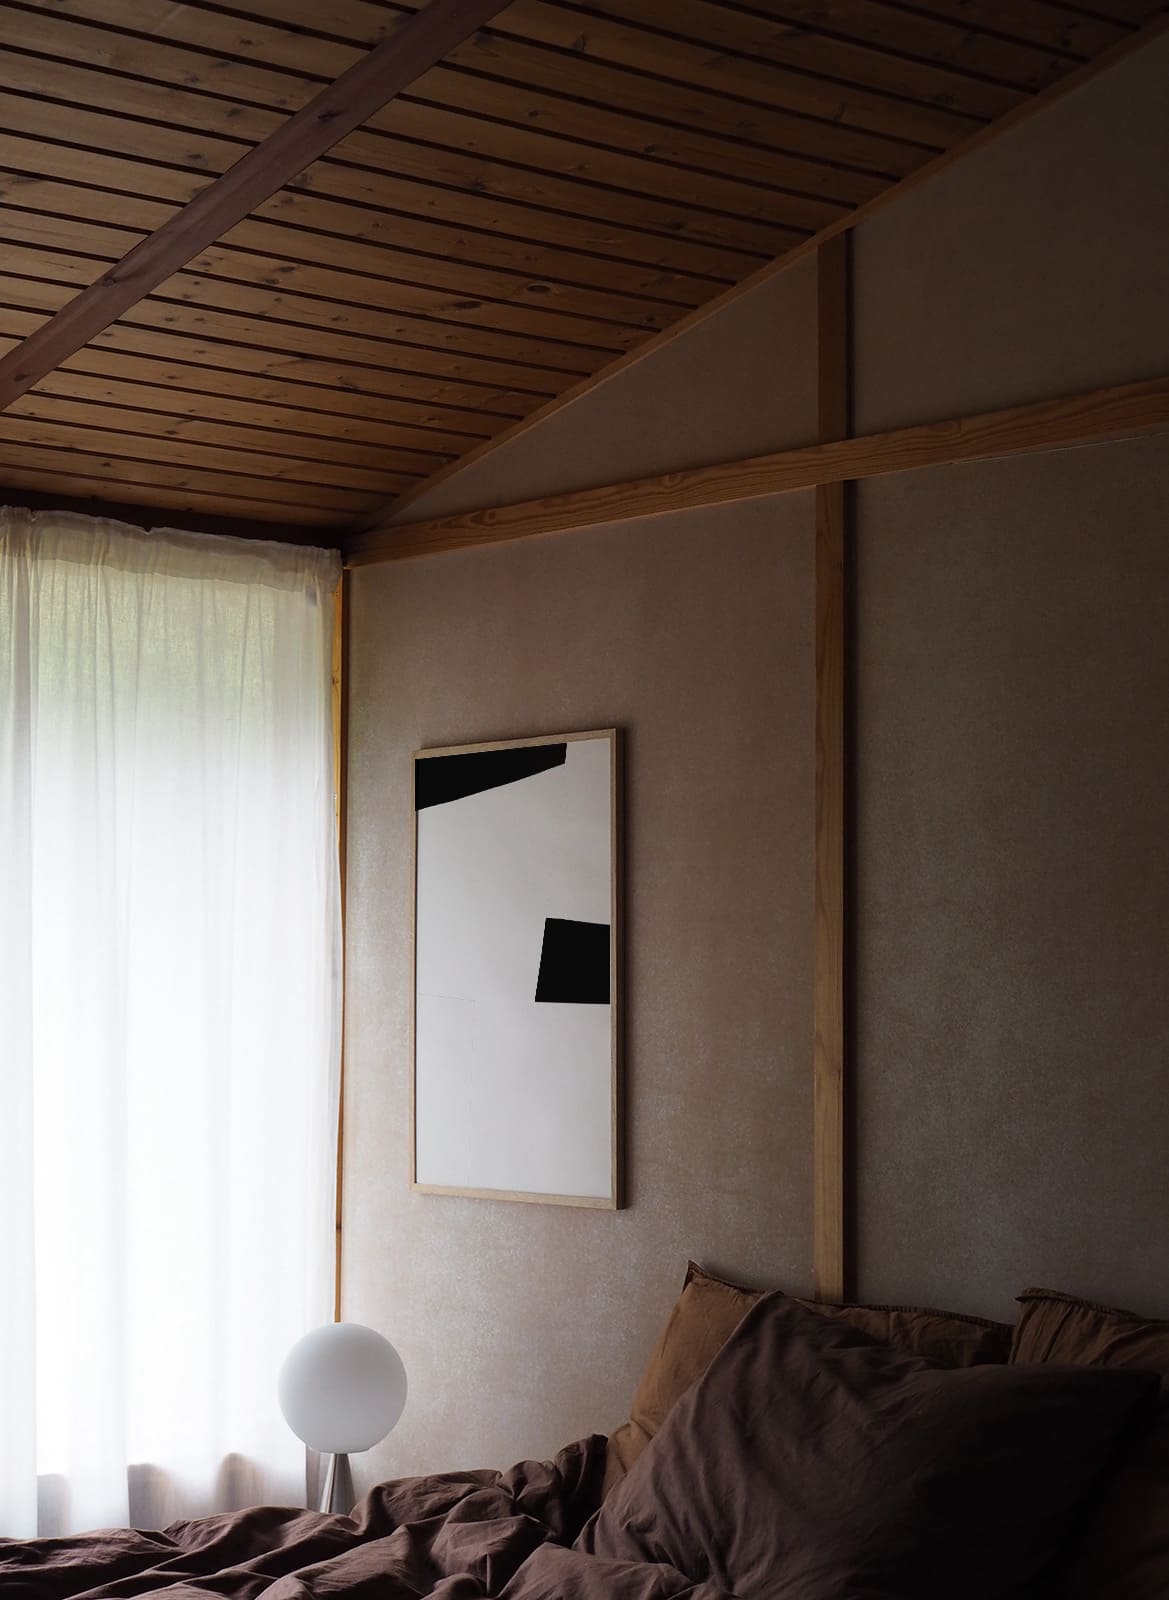 Framed minimalistic poster hanging above a bed by atelier cph